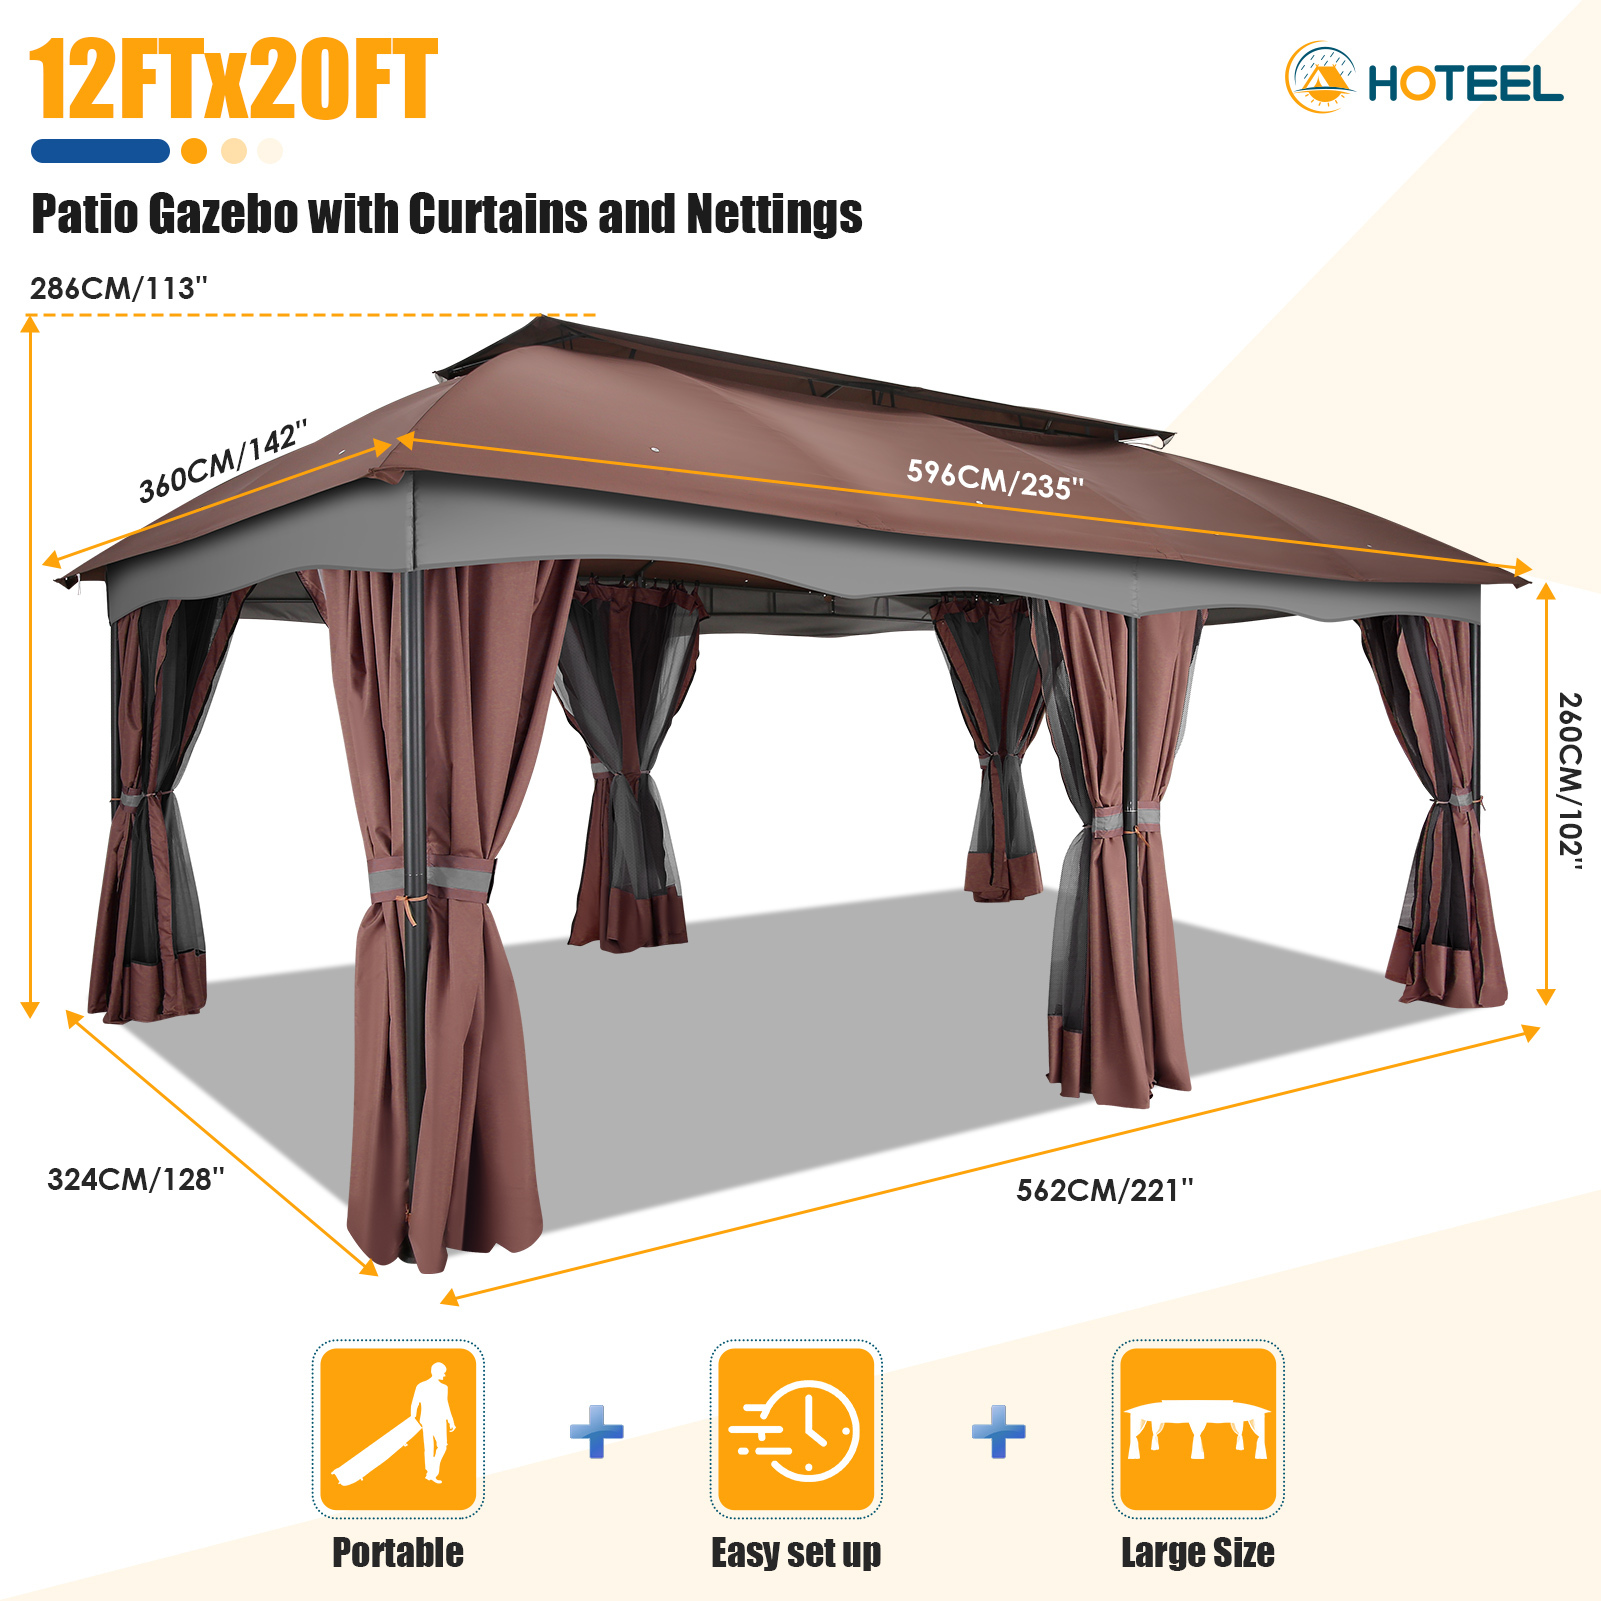 COBIZI 12X20 Heavy Duty Gazebo Outdoor Gazebo with Mosquito Netting and Curtains, Canopy Tent Deck Gazebo with Double-Arc Roof Ventiation and Metal Steel Frame Suitable for Lawn, Backyard, Patio - image 4 of 11